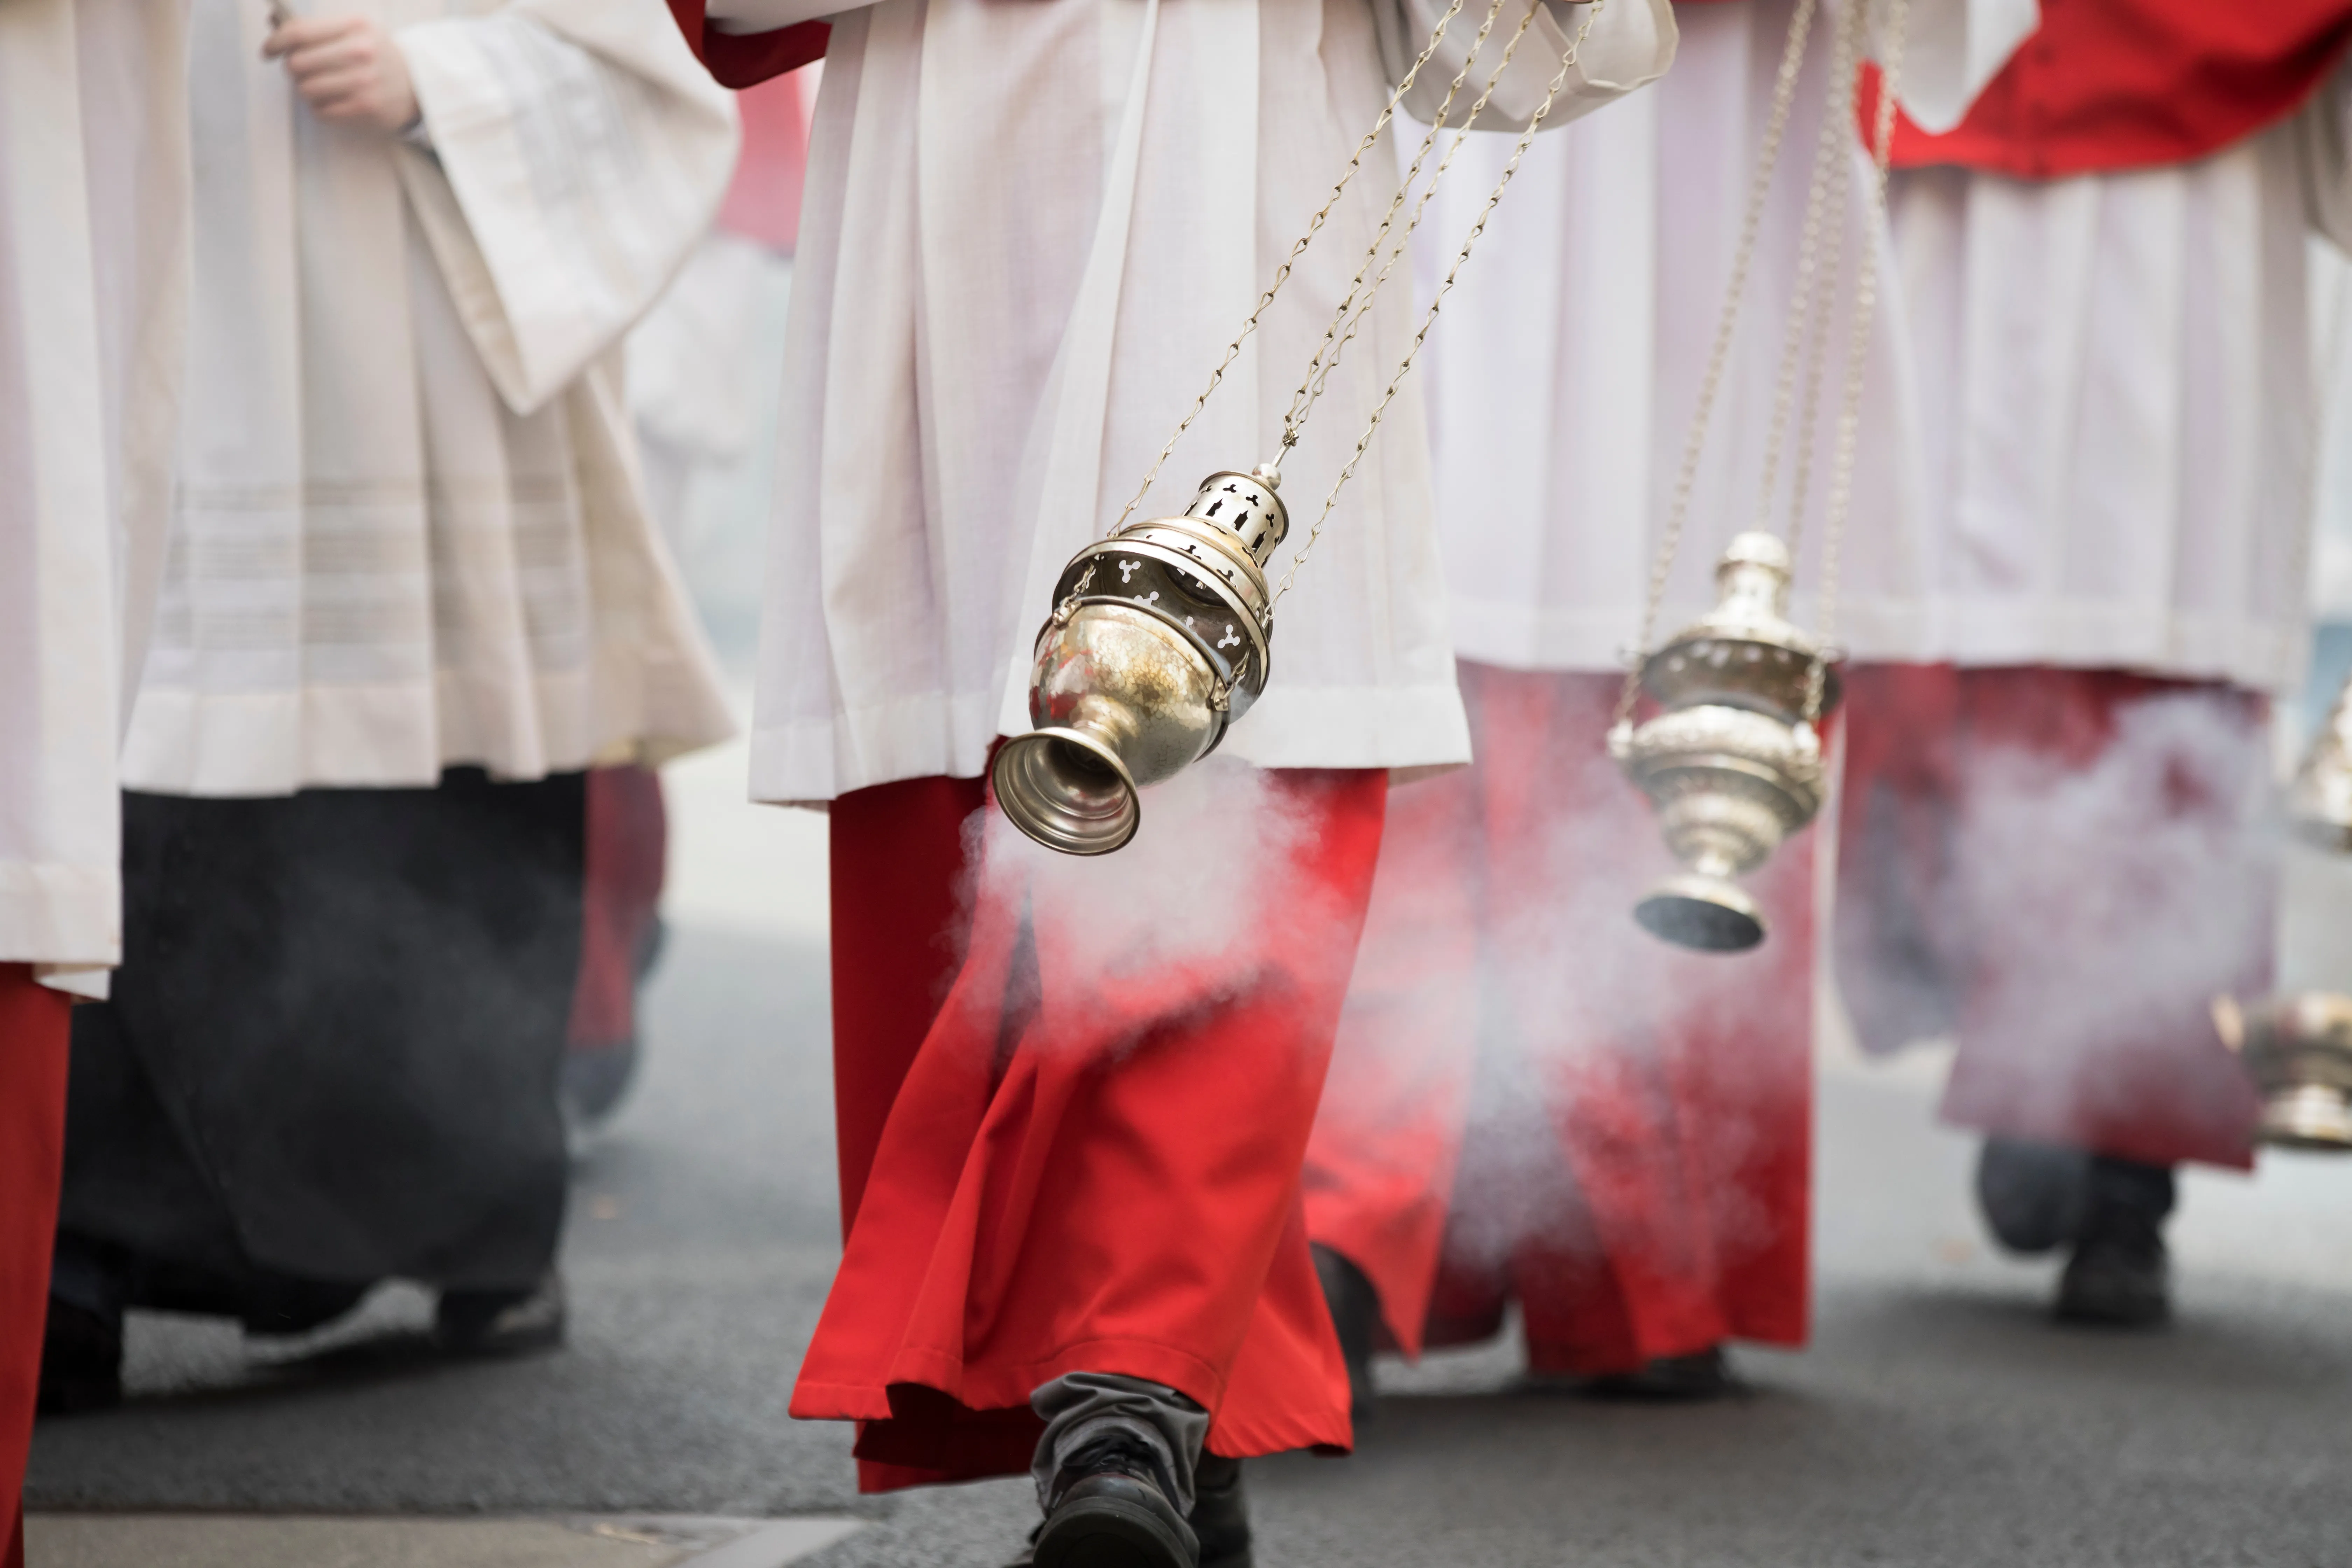 Altar boys swing incense in a procession in Cologne, Germany.?w=200&h=150